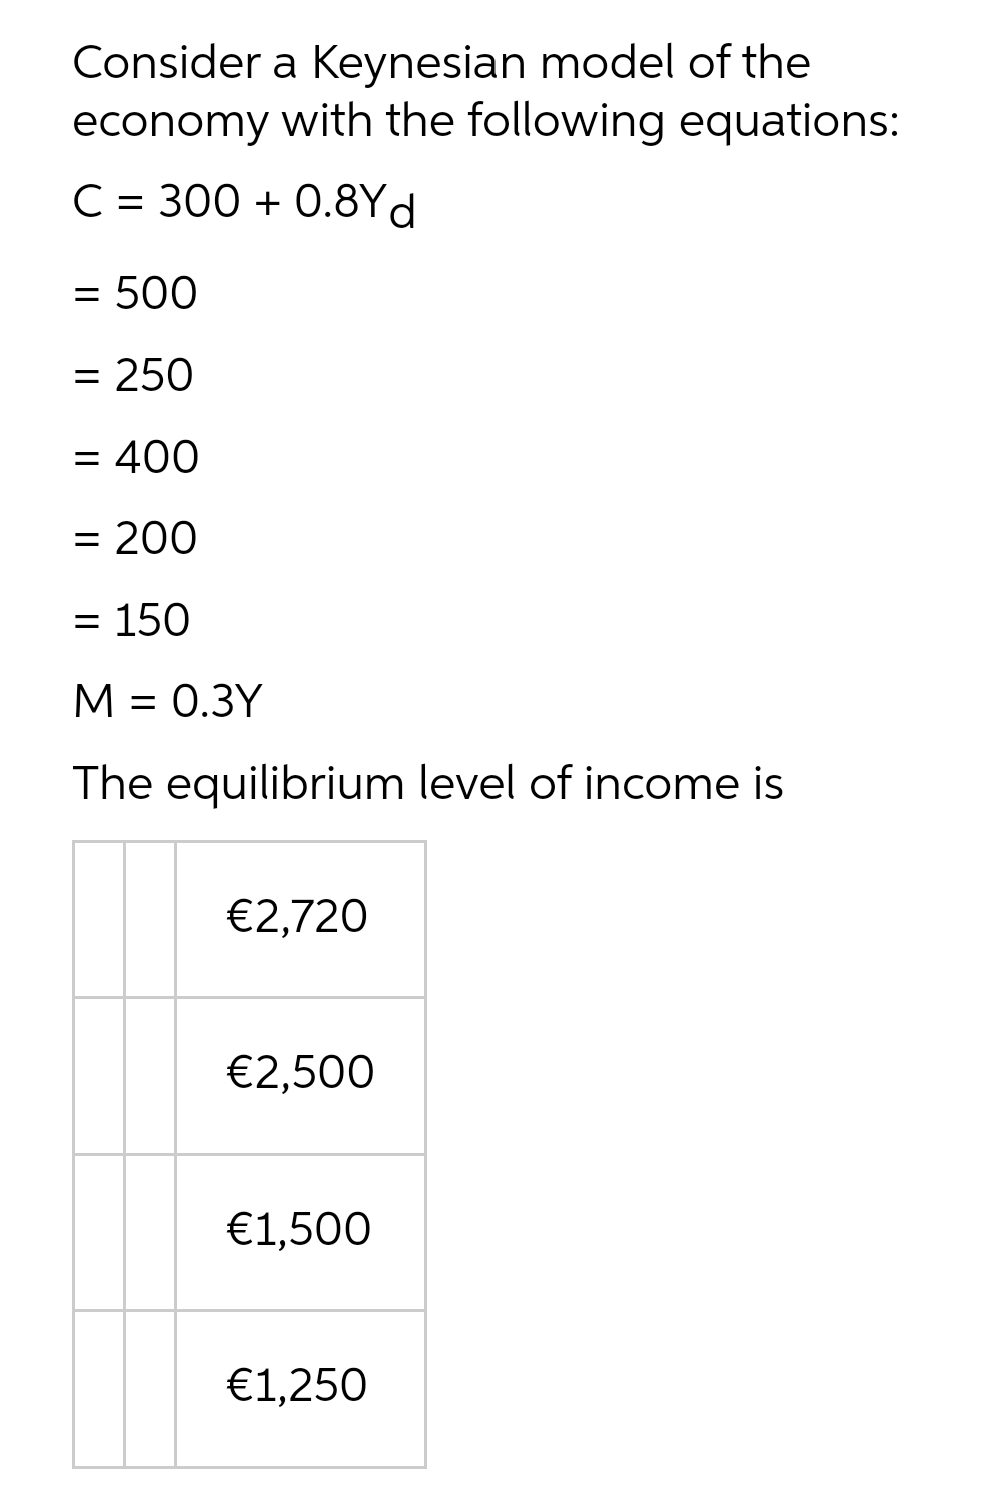 Consider a Keynesian model of the
economy with the following equations:
C = 300 + 0.8Yd
= 500
= 250
= 400
= 200
= 150
M = 0.3Y
The equilibrium level of income is
€2,720
€2,500
€1,500
€1,250
